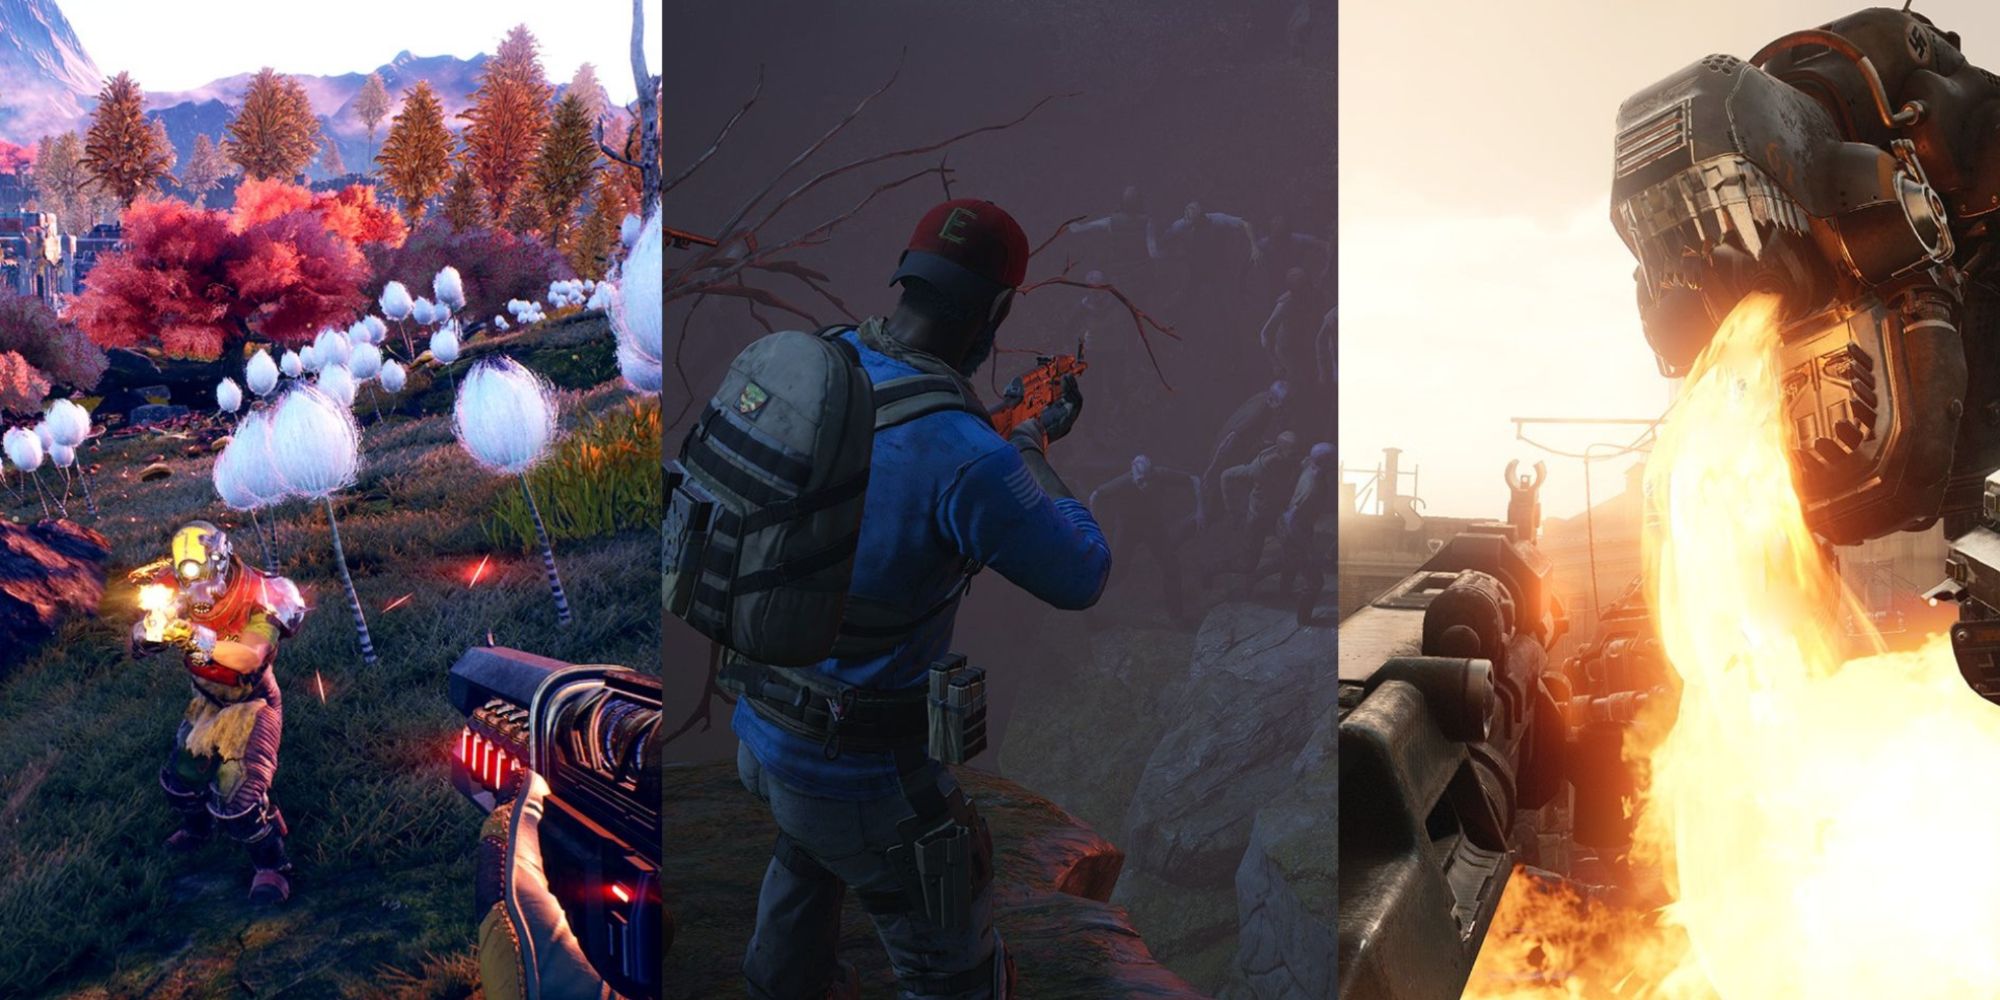 FPS Games On Xbox Game Pass Featured Split Image The Outer Worlds, Back 4 Blood, and Wolfenstein 2